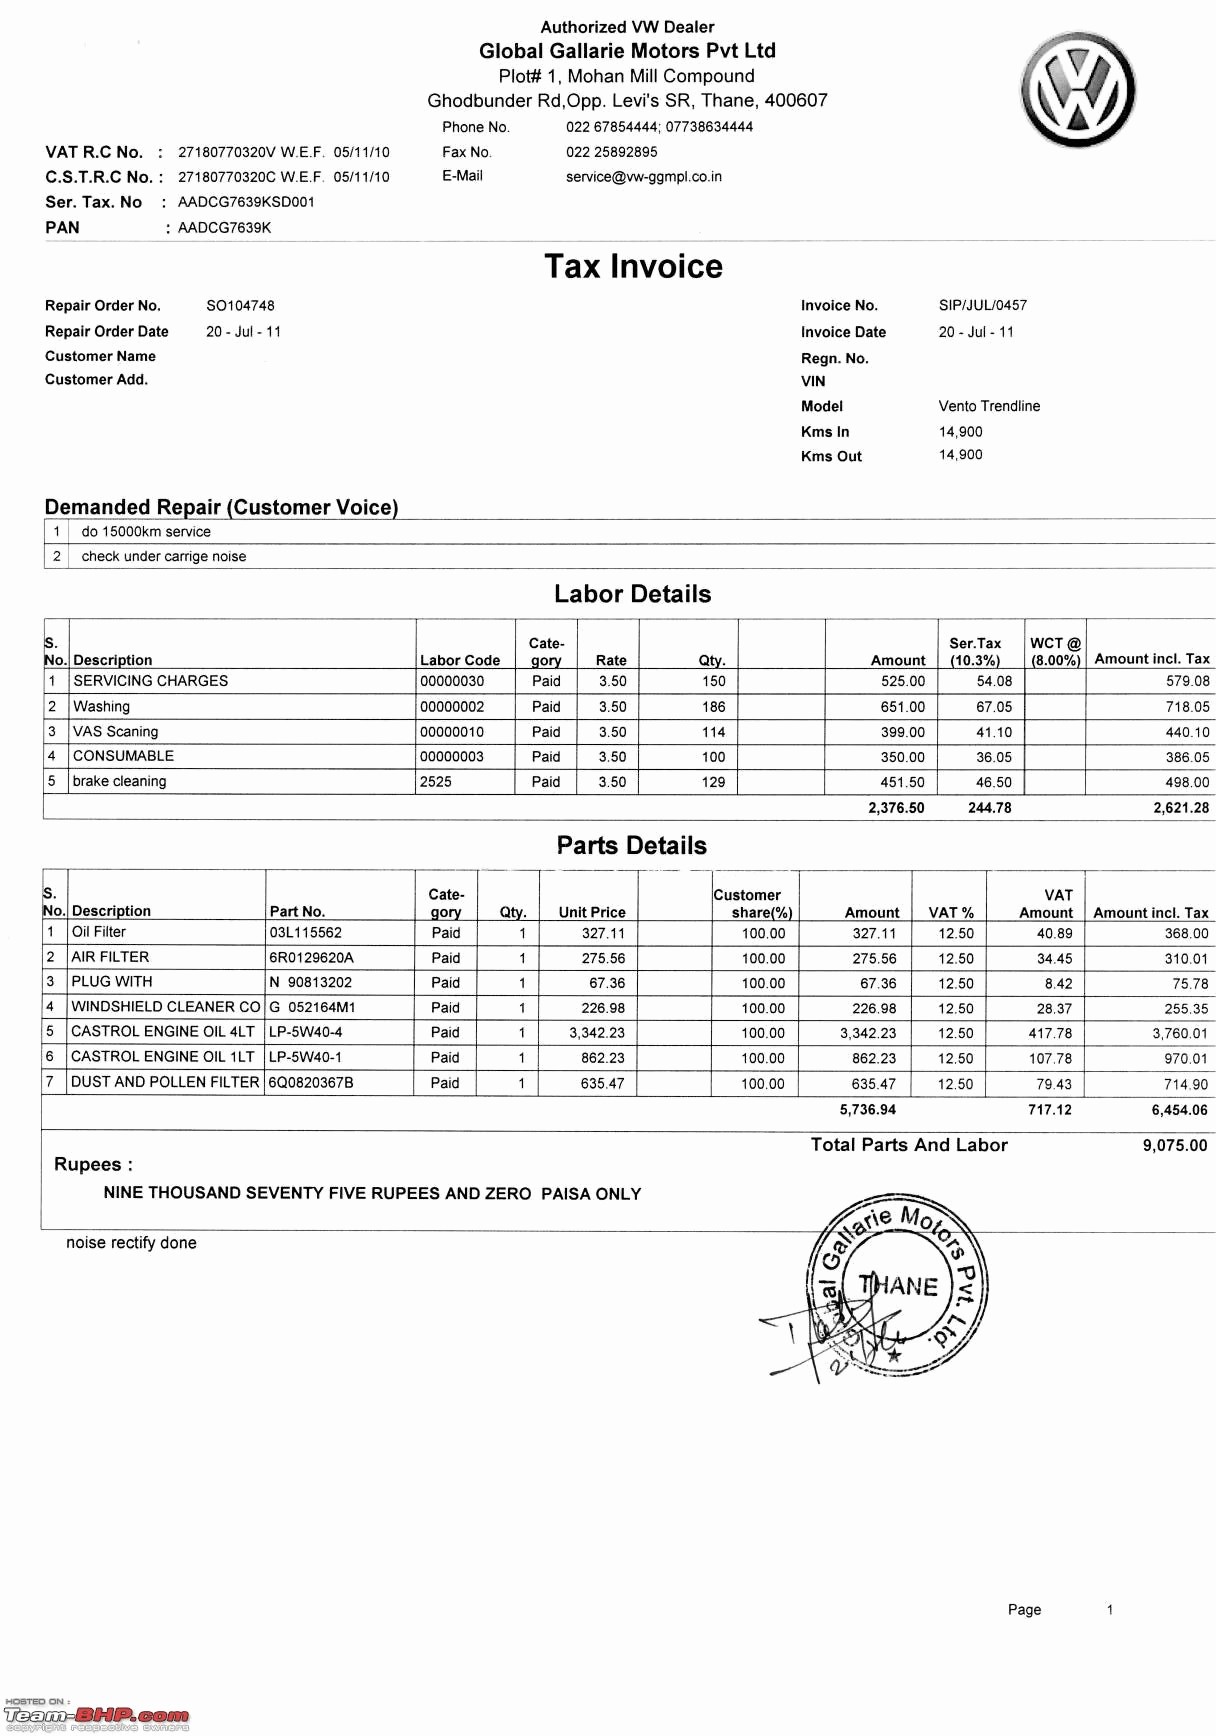 Copy Of An Invoice Template Elegant Copies Invoices Invoice Template Ideas